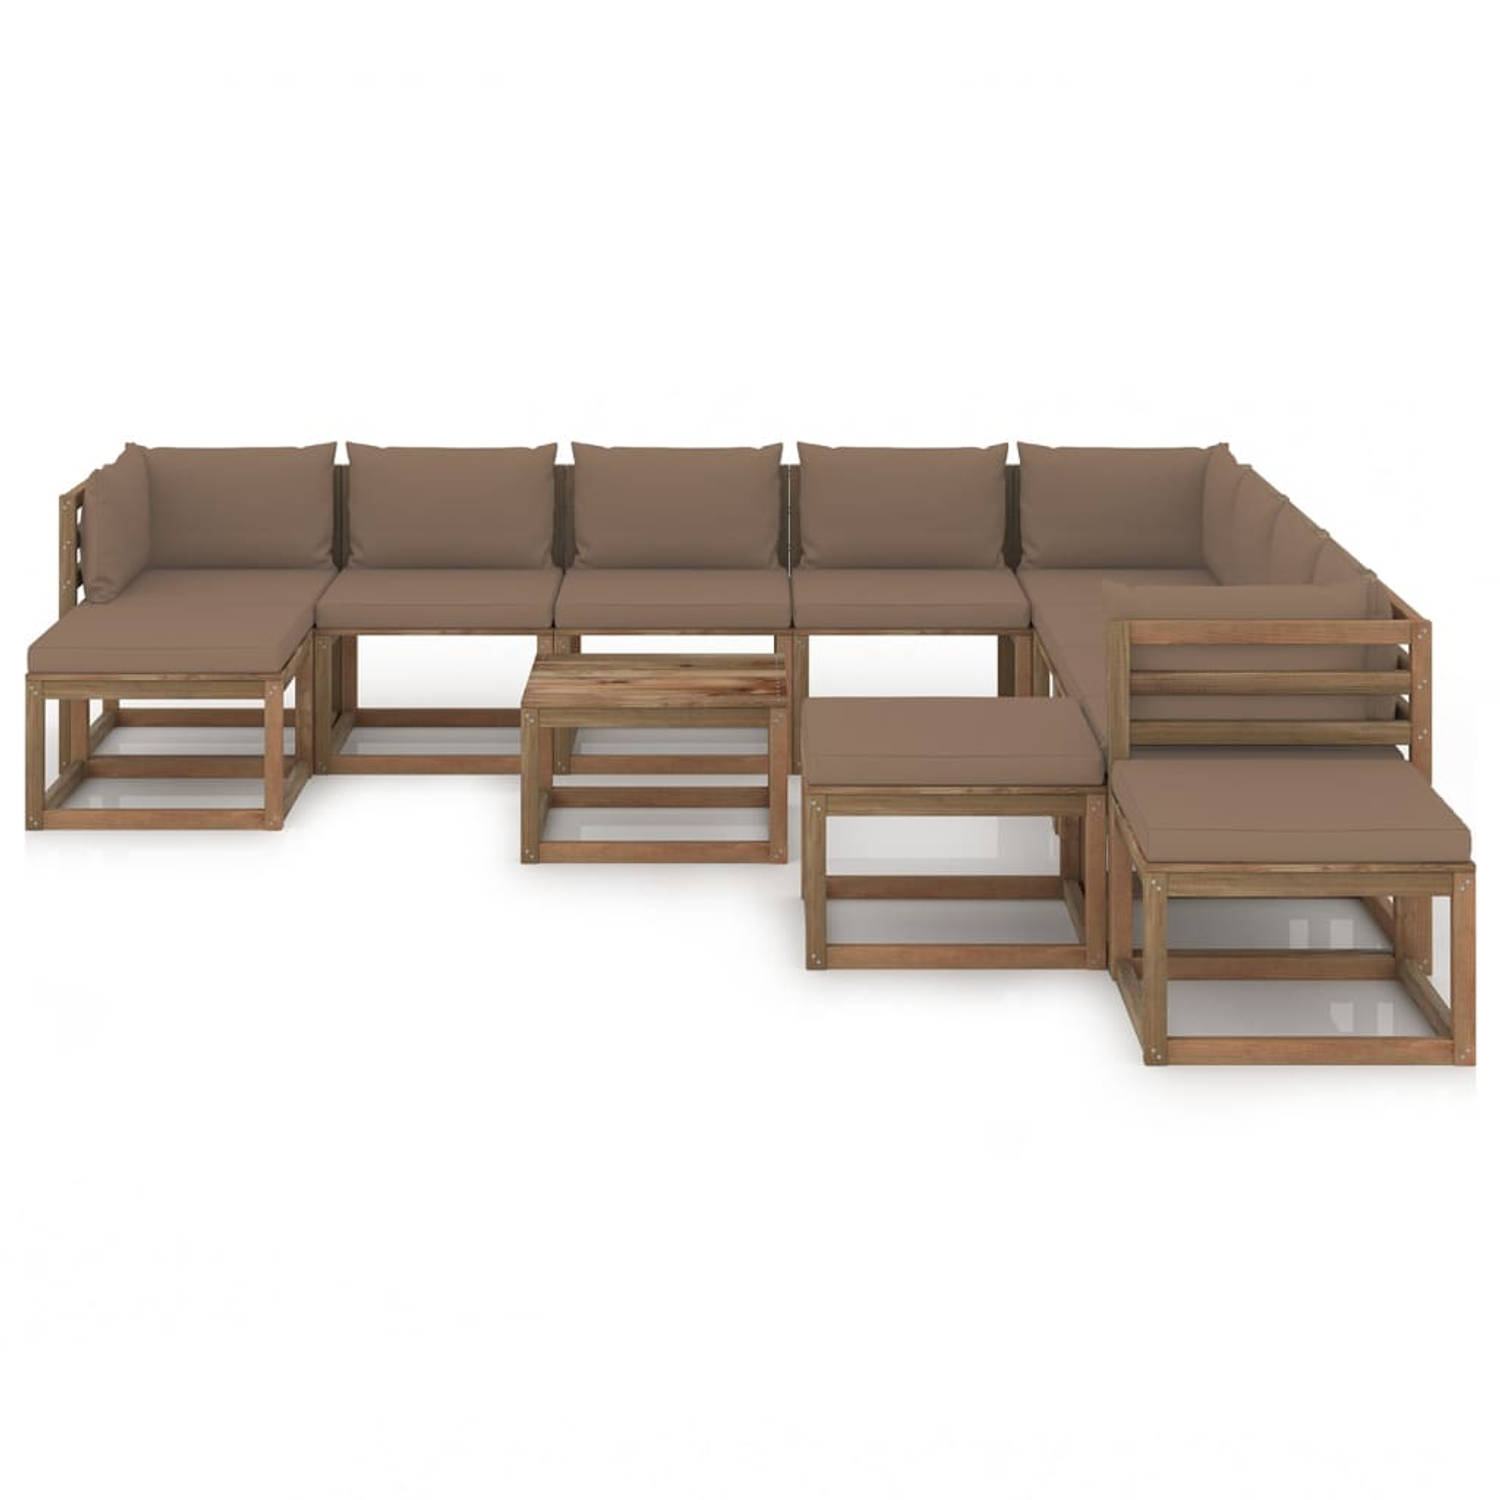 The Living Store Tuinset Grenenhout - Modulair - Taupe - 60x60x36.5 cm - 60x64x70 cm - 64x64x70 cm